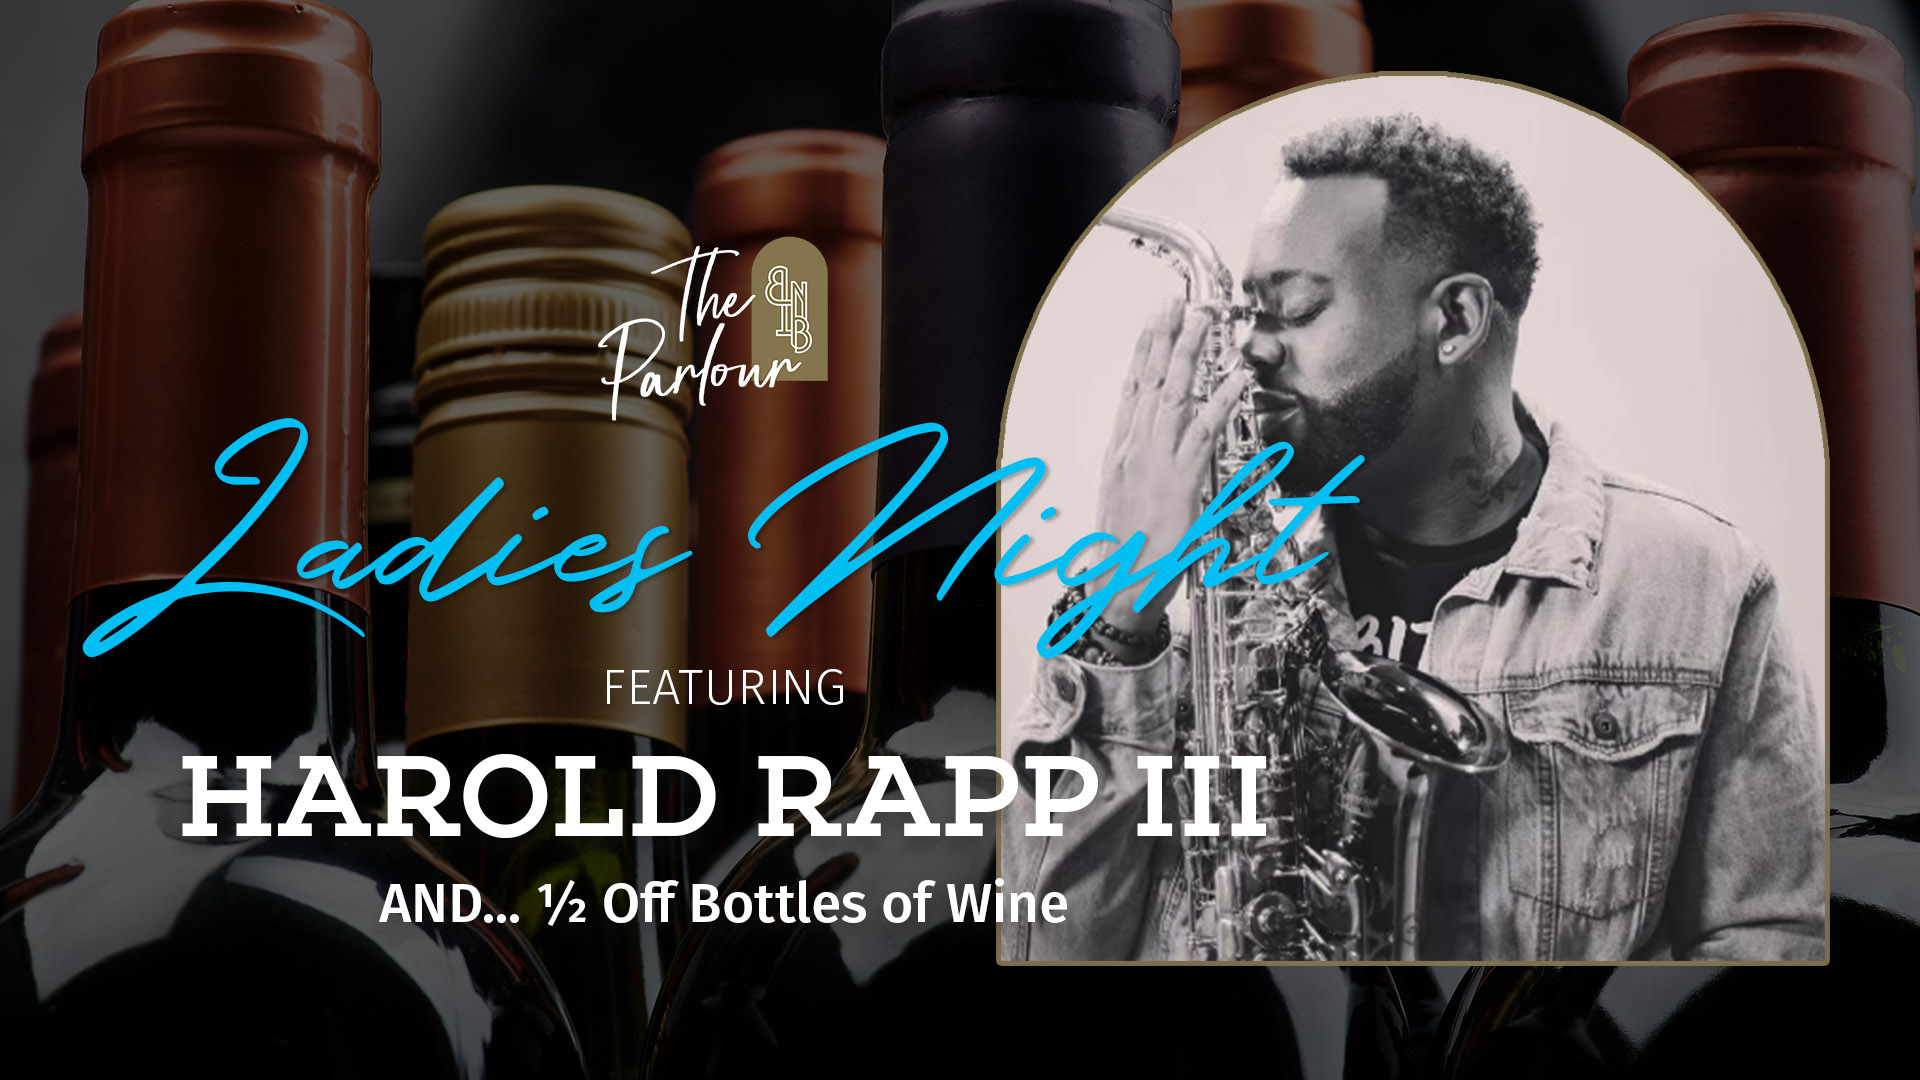 Bottles of wine in the background with an image of renowned saxophonist Harold Rapp III to highlight ladies night on Thursdays at Bottled in Bond The Parlour